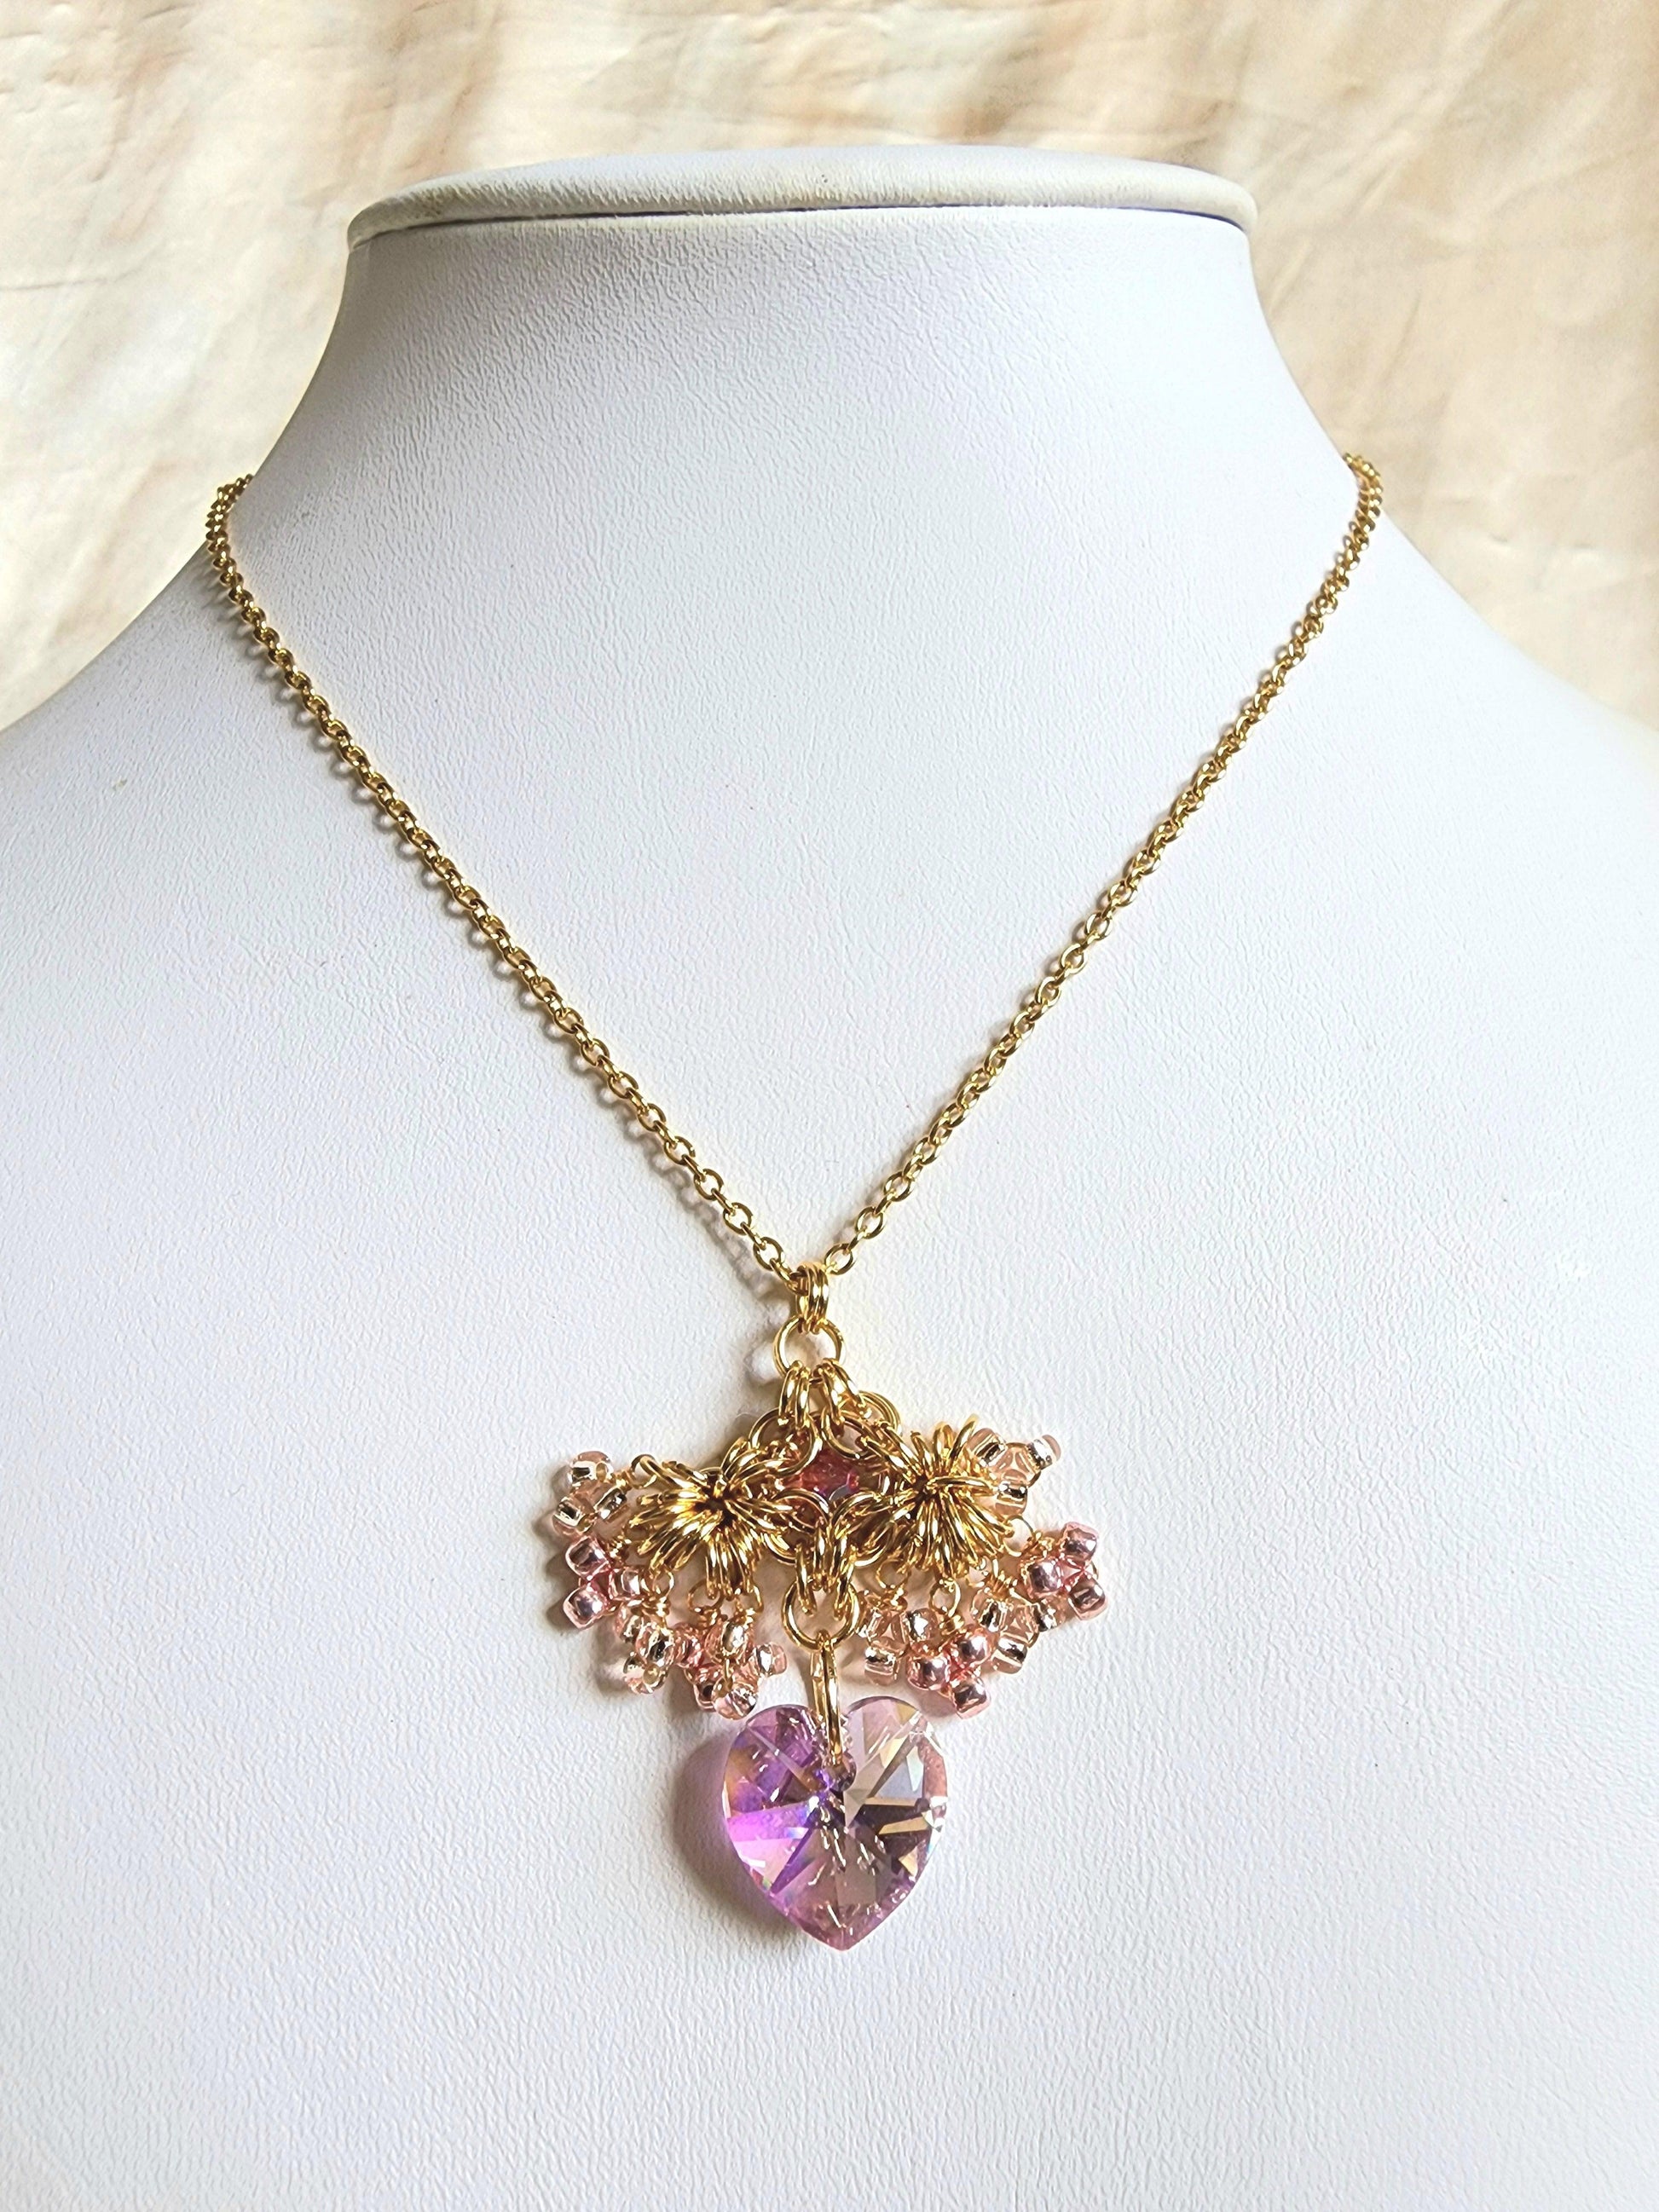 Heart Bouquet Chainmail Necklace - By Cocoyu